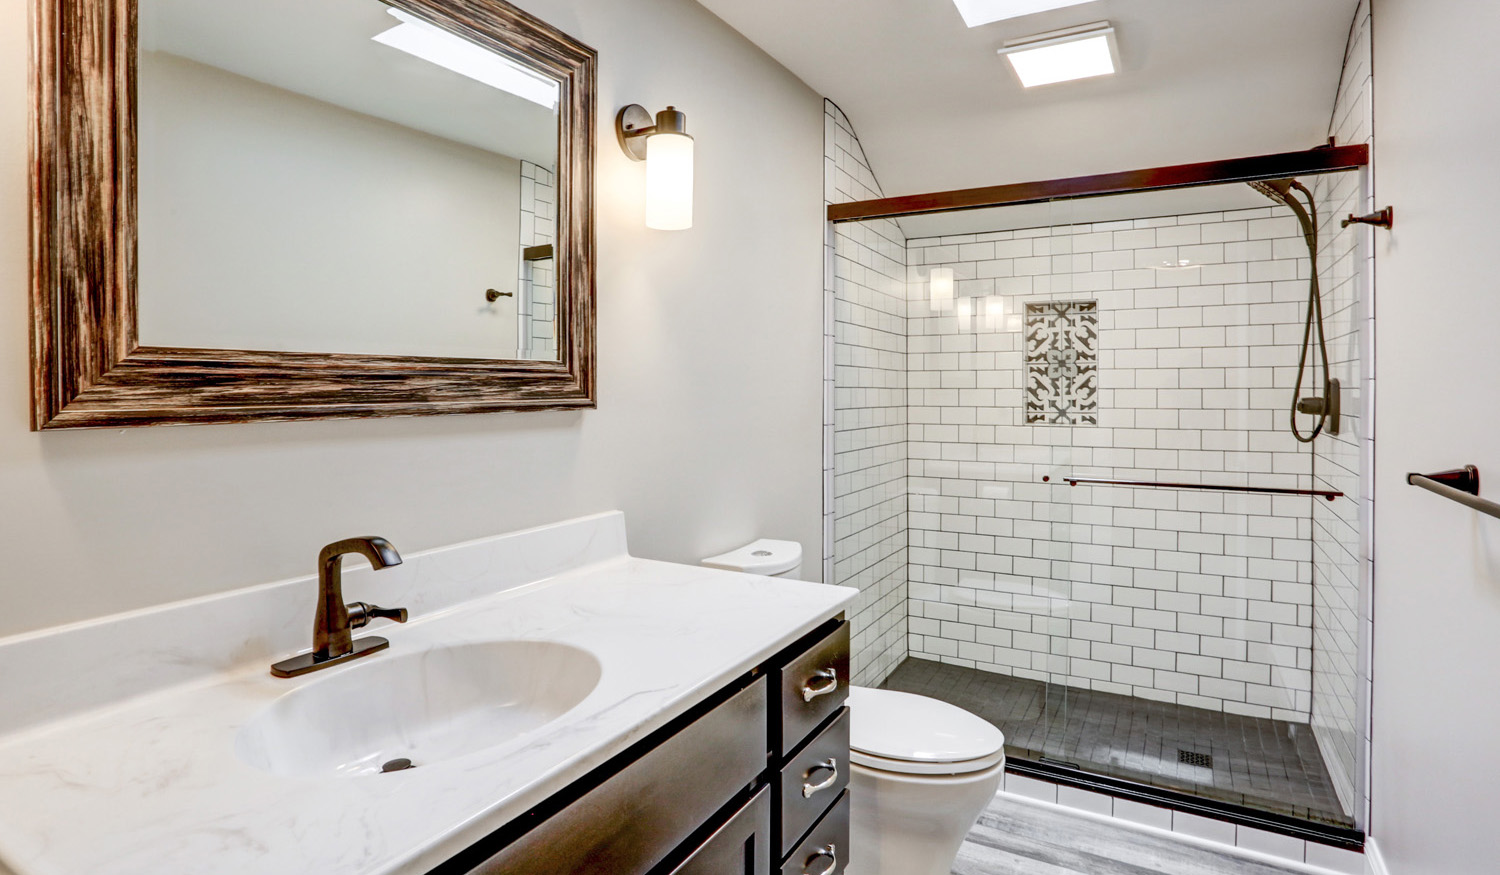 Lancaster Bathroom Remodel with Tile shower and dark accents